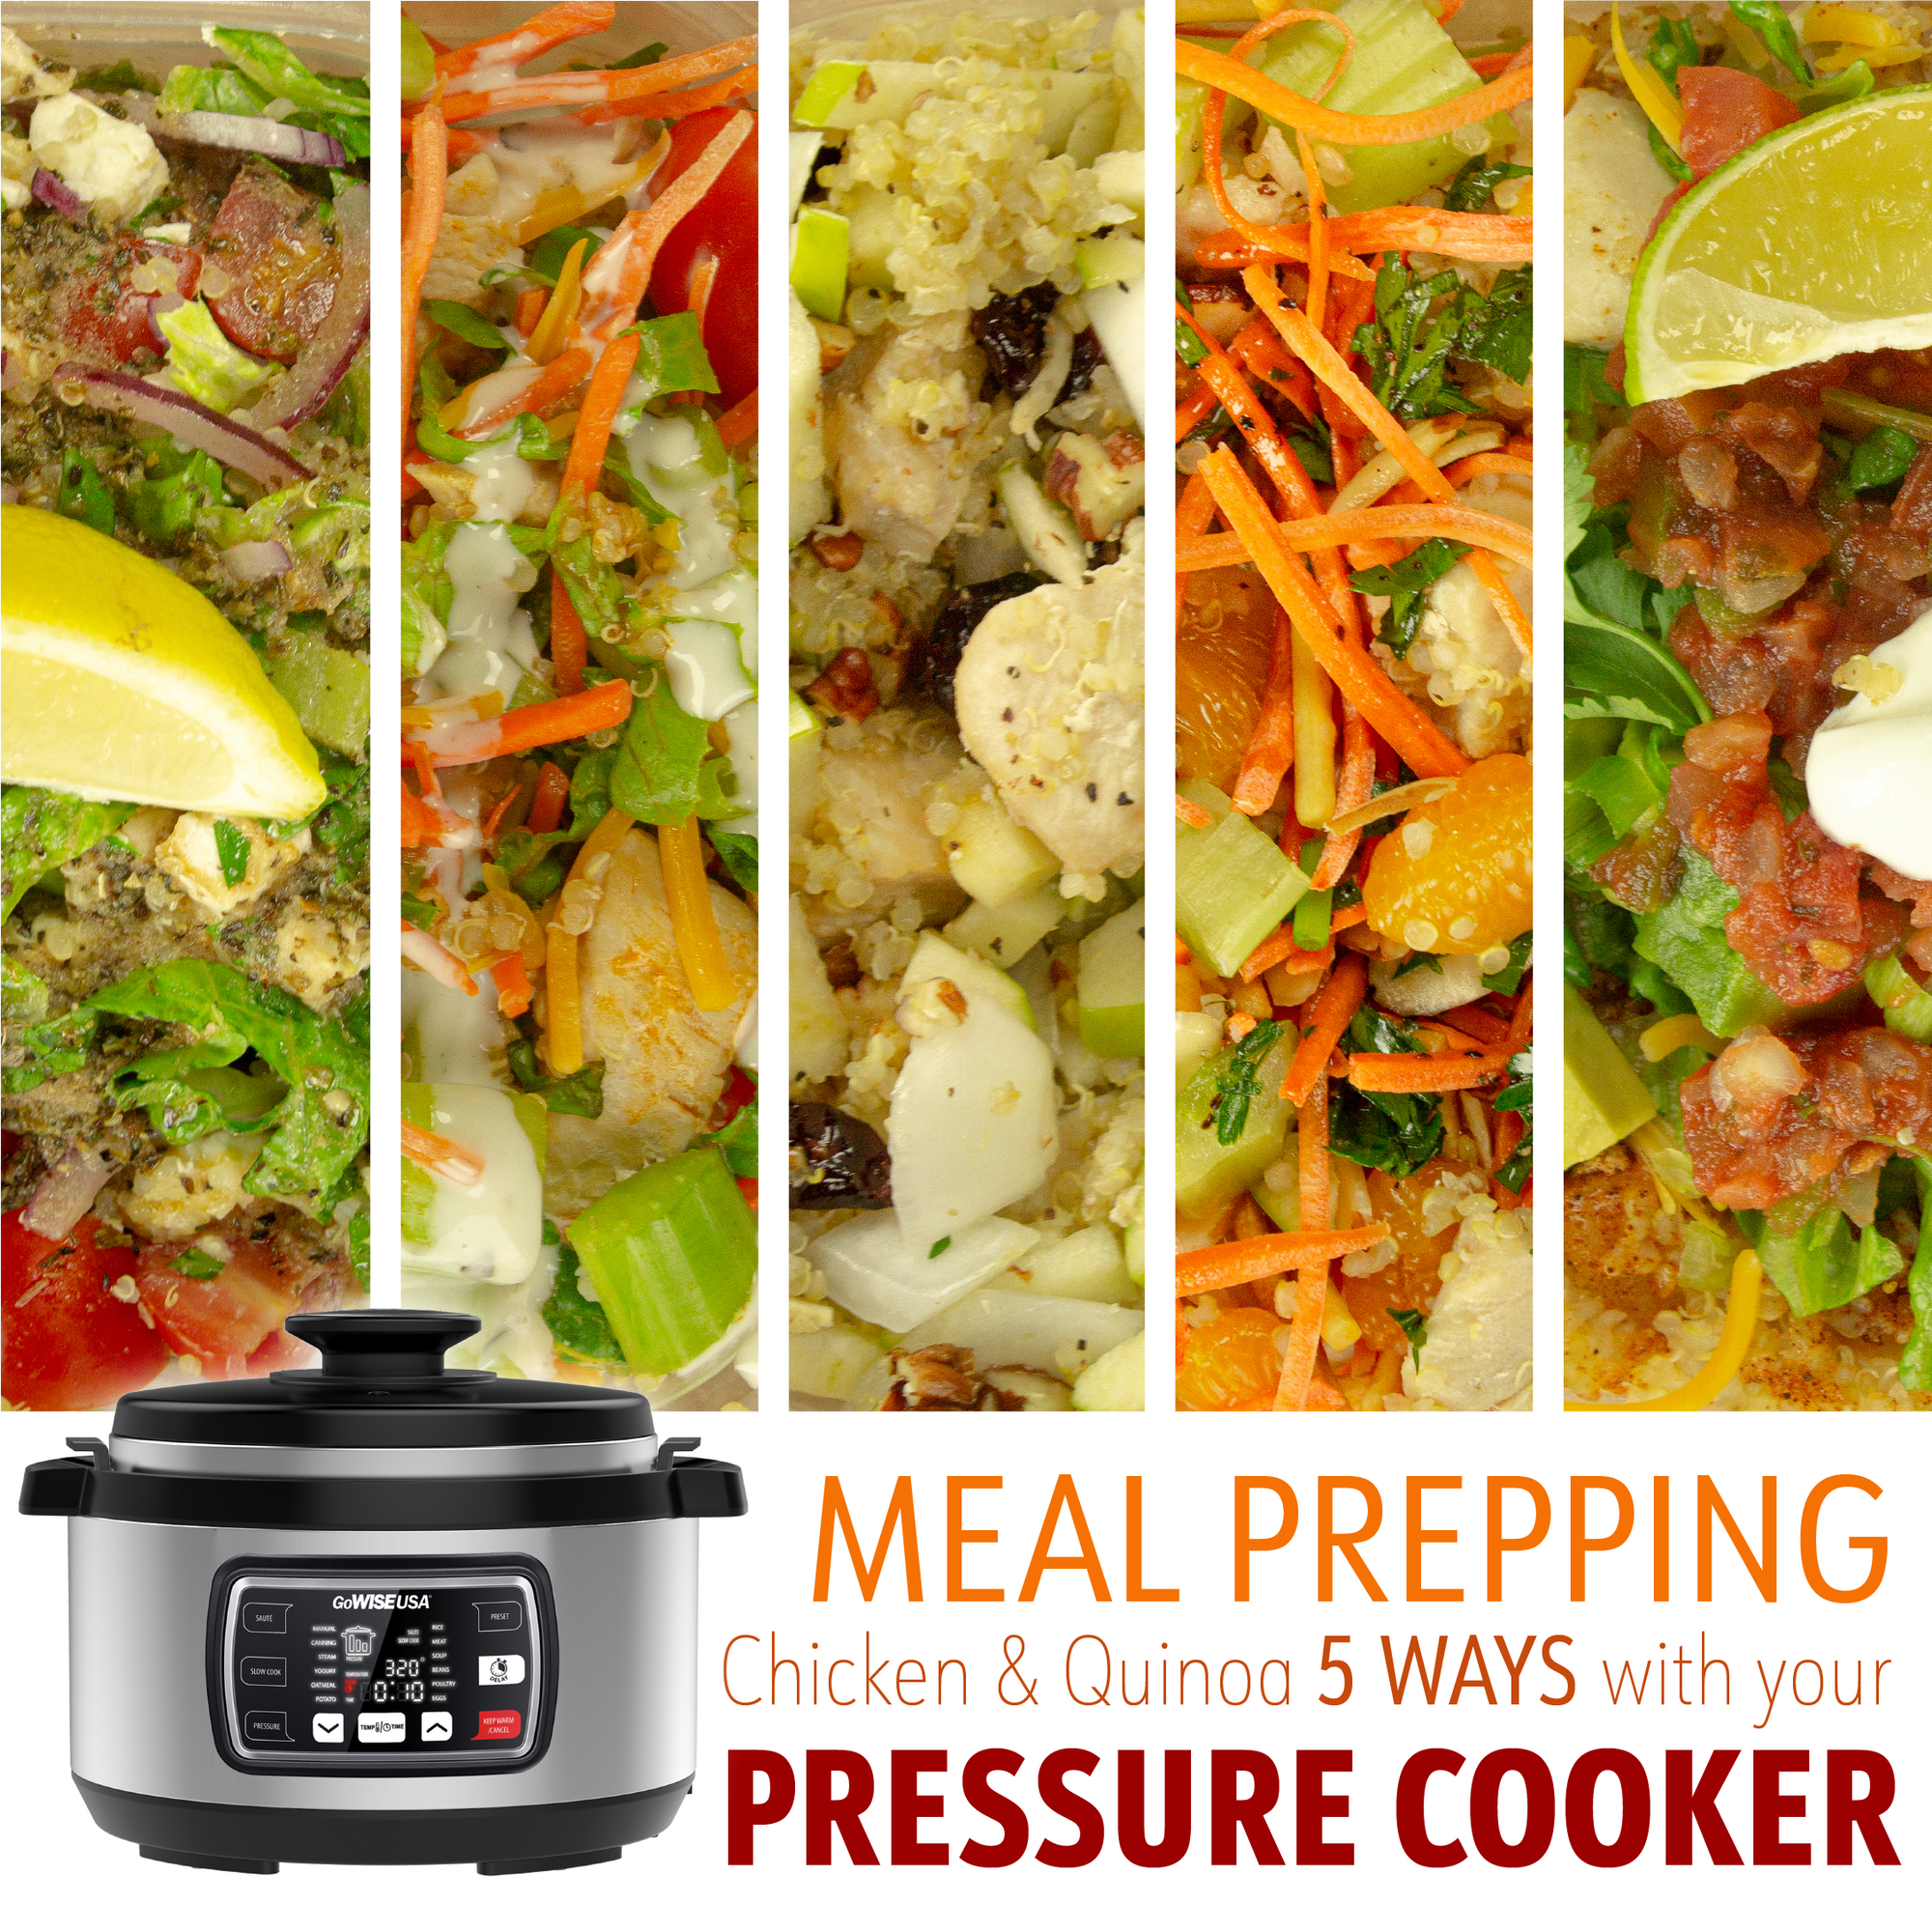 Meal Prepping with Your Pressure Cooker